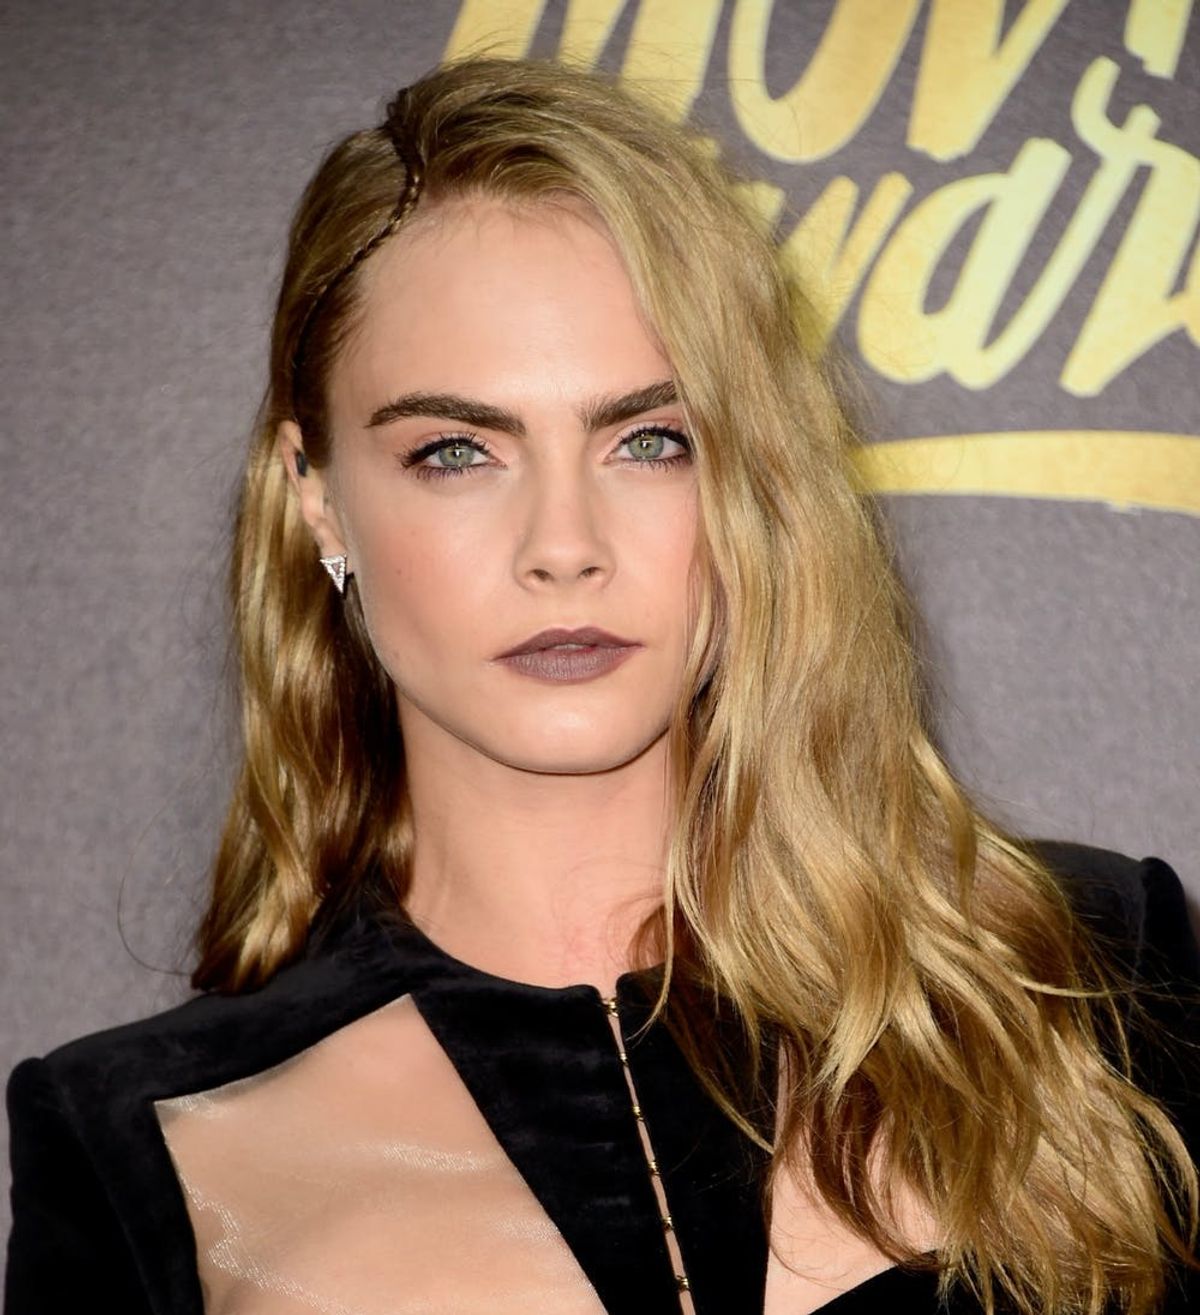 The Meaning Behind Cara Delevingne’s Side Tattoo Is Super Touching